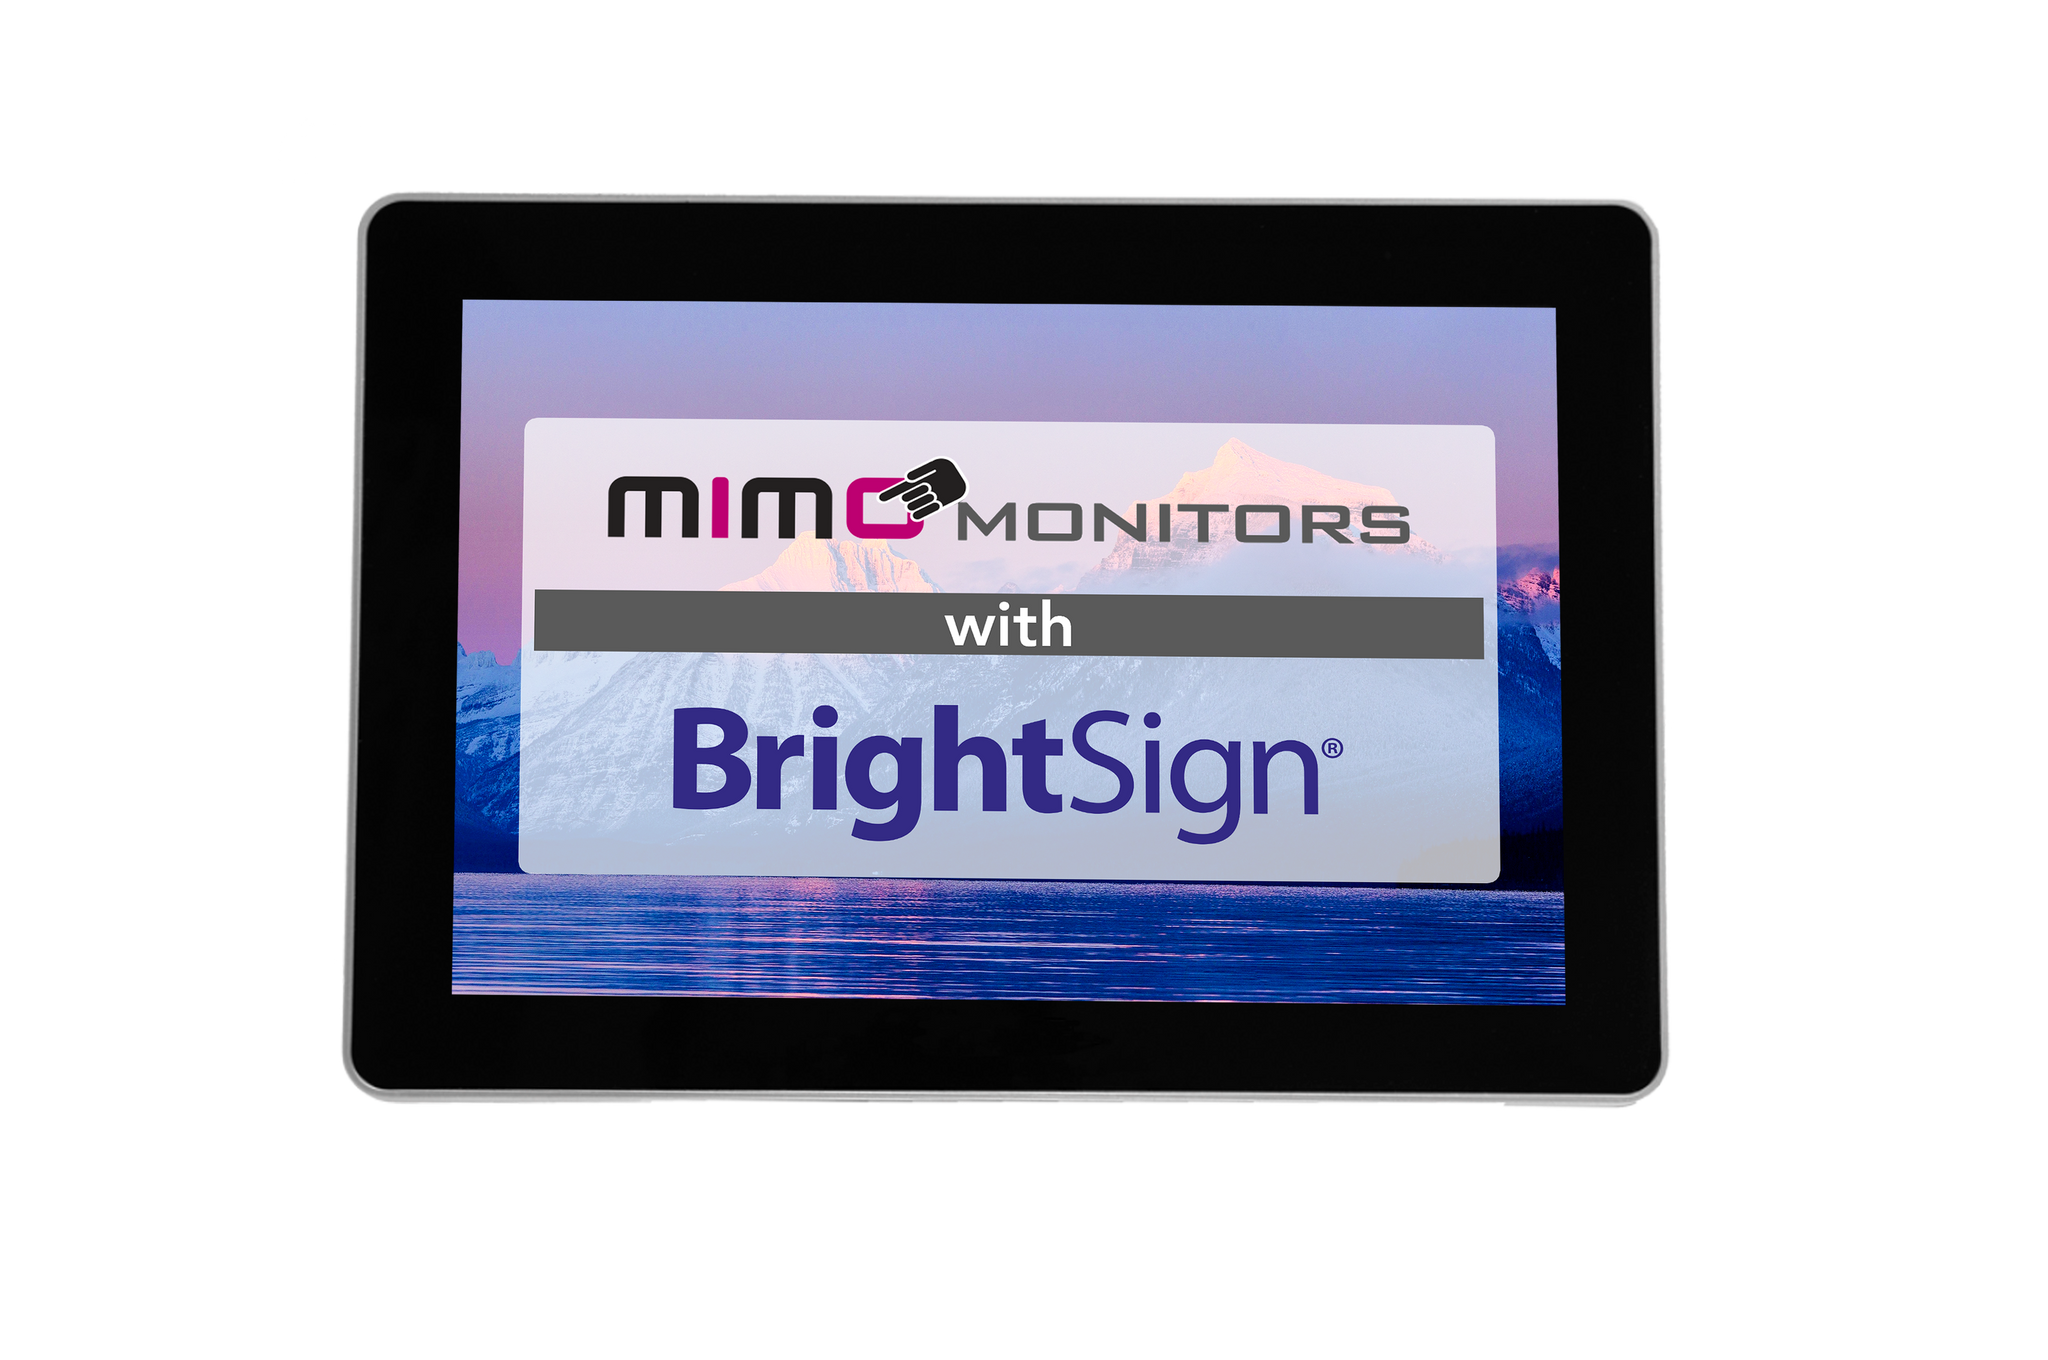 Mimo Monitors and BrightSign Partner for Revolutionary Entry in the Digital Signage Market